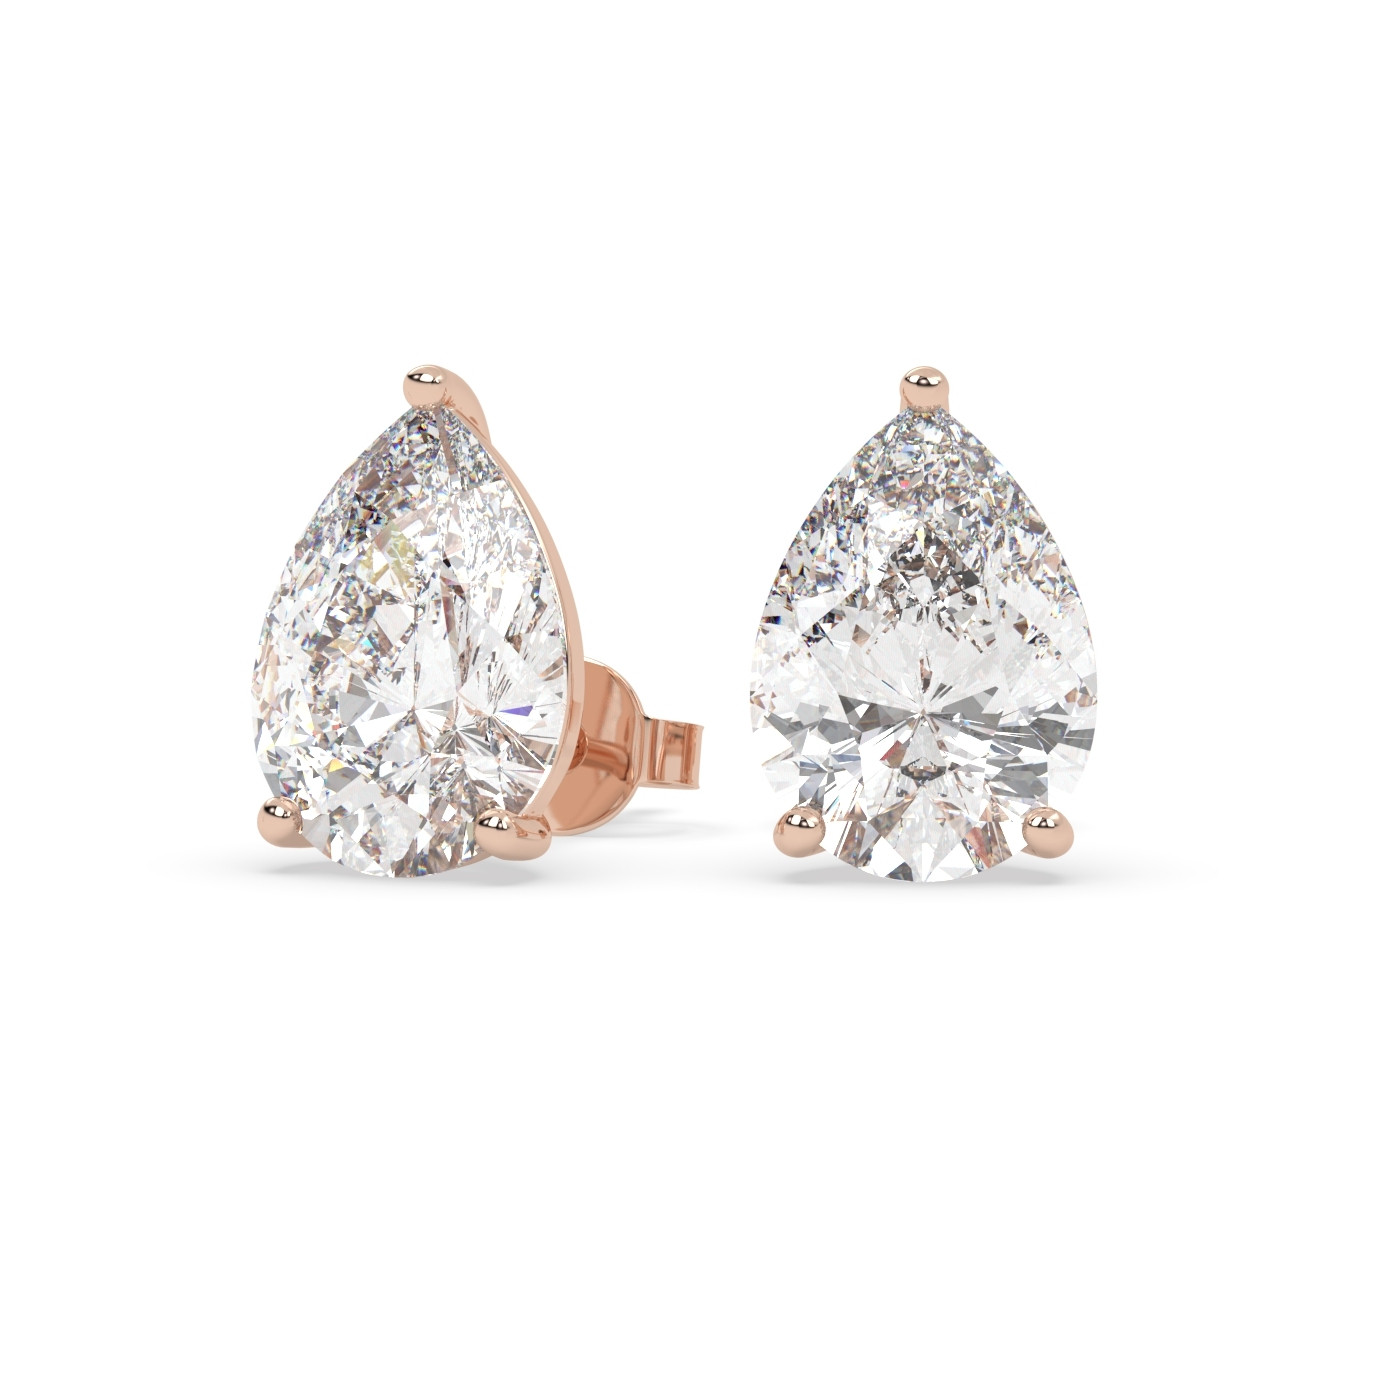 18K ROSE GOLD Pear Stud Earrings with butterfly back